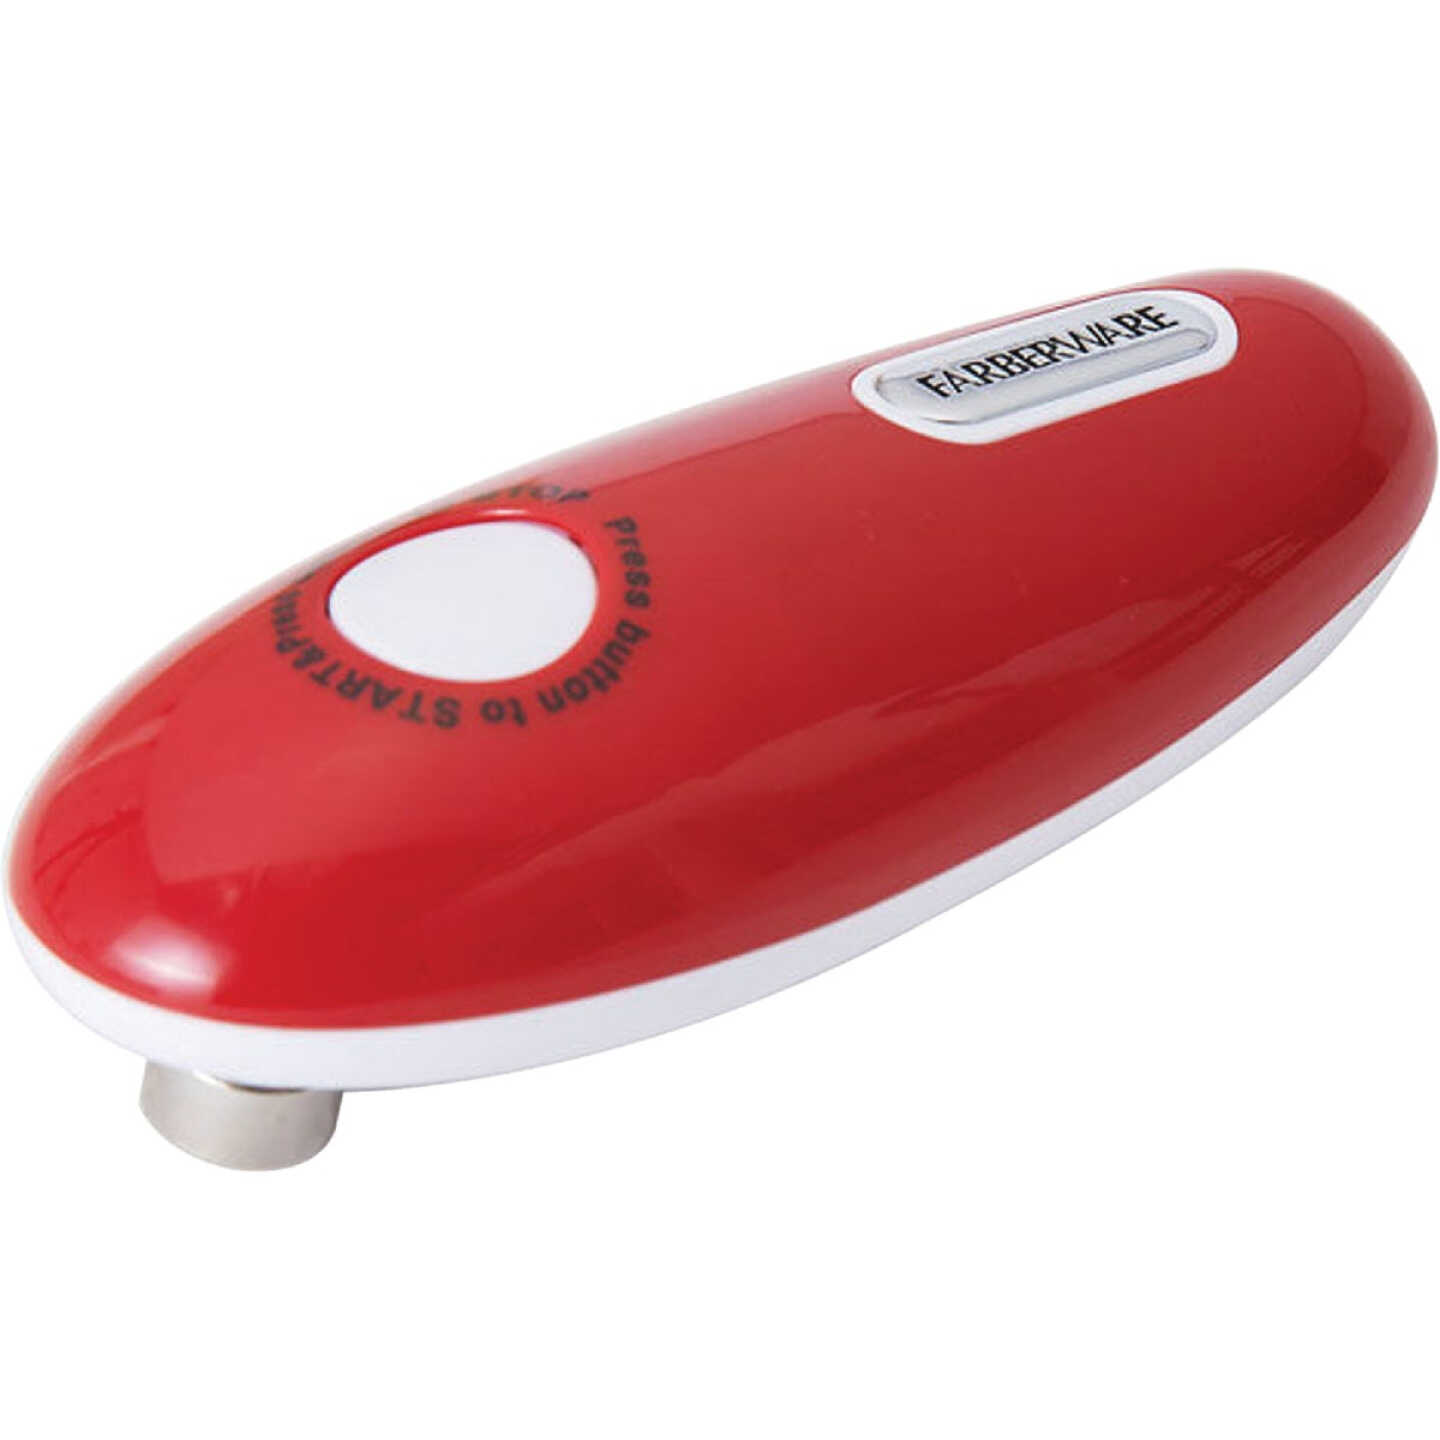 Farberware Electric Can Opener Red One Touch Hands Free - Brand New